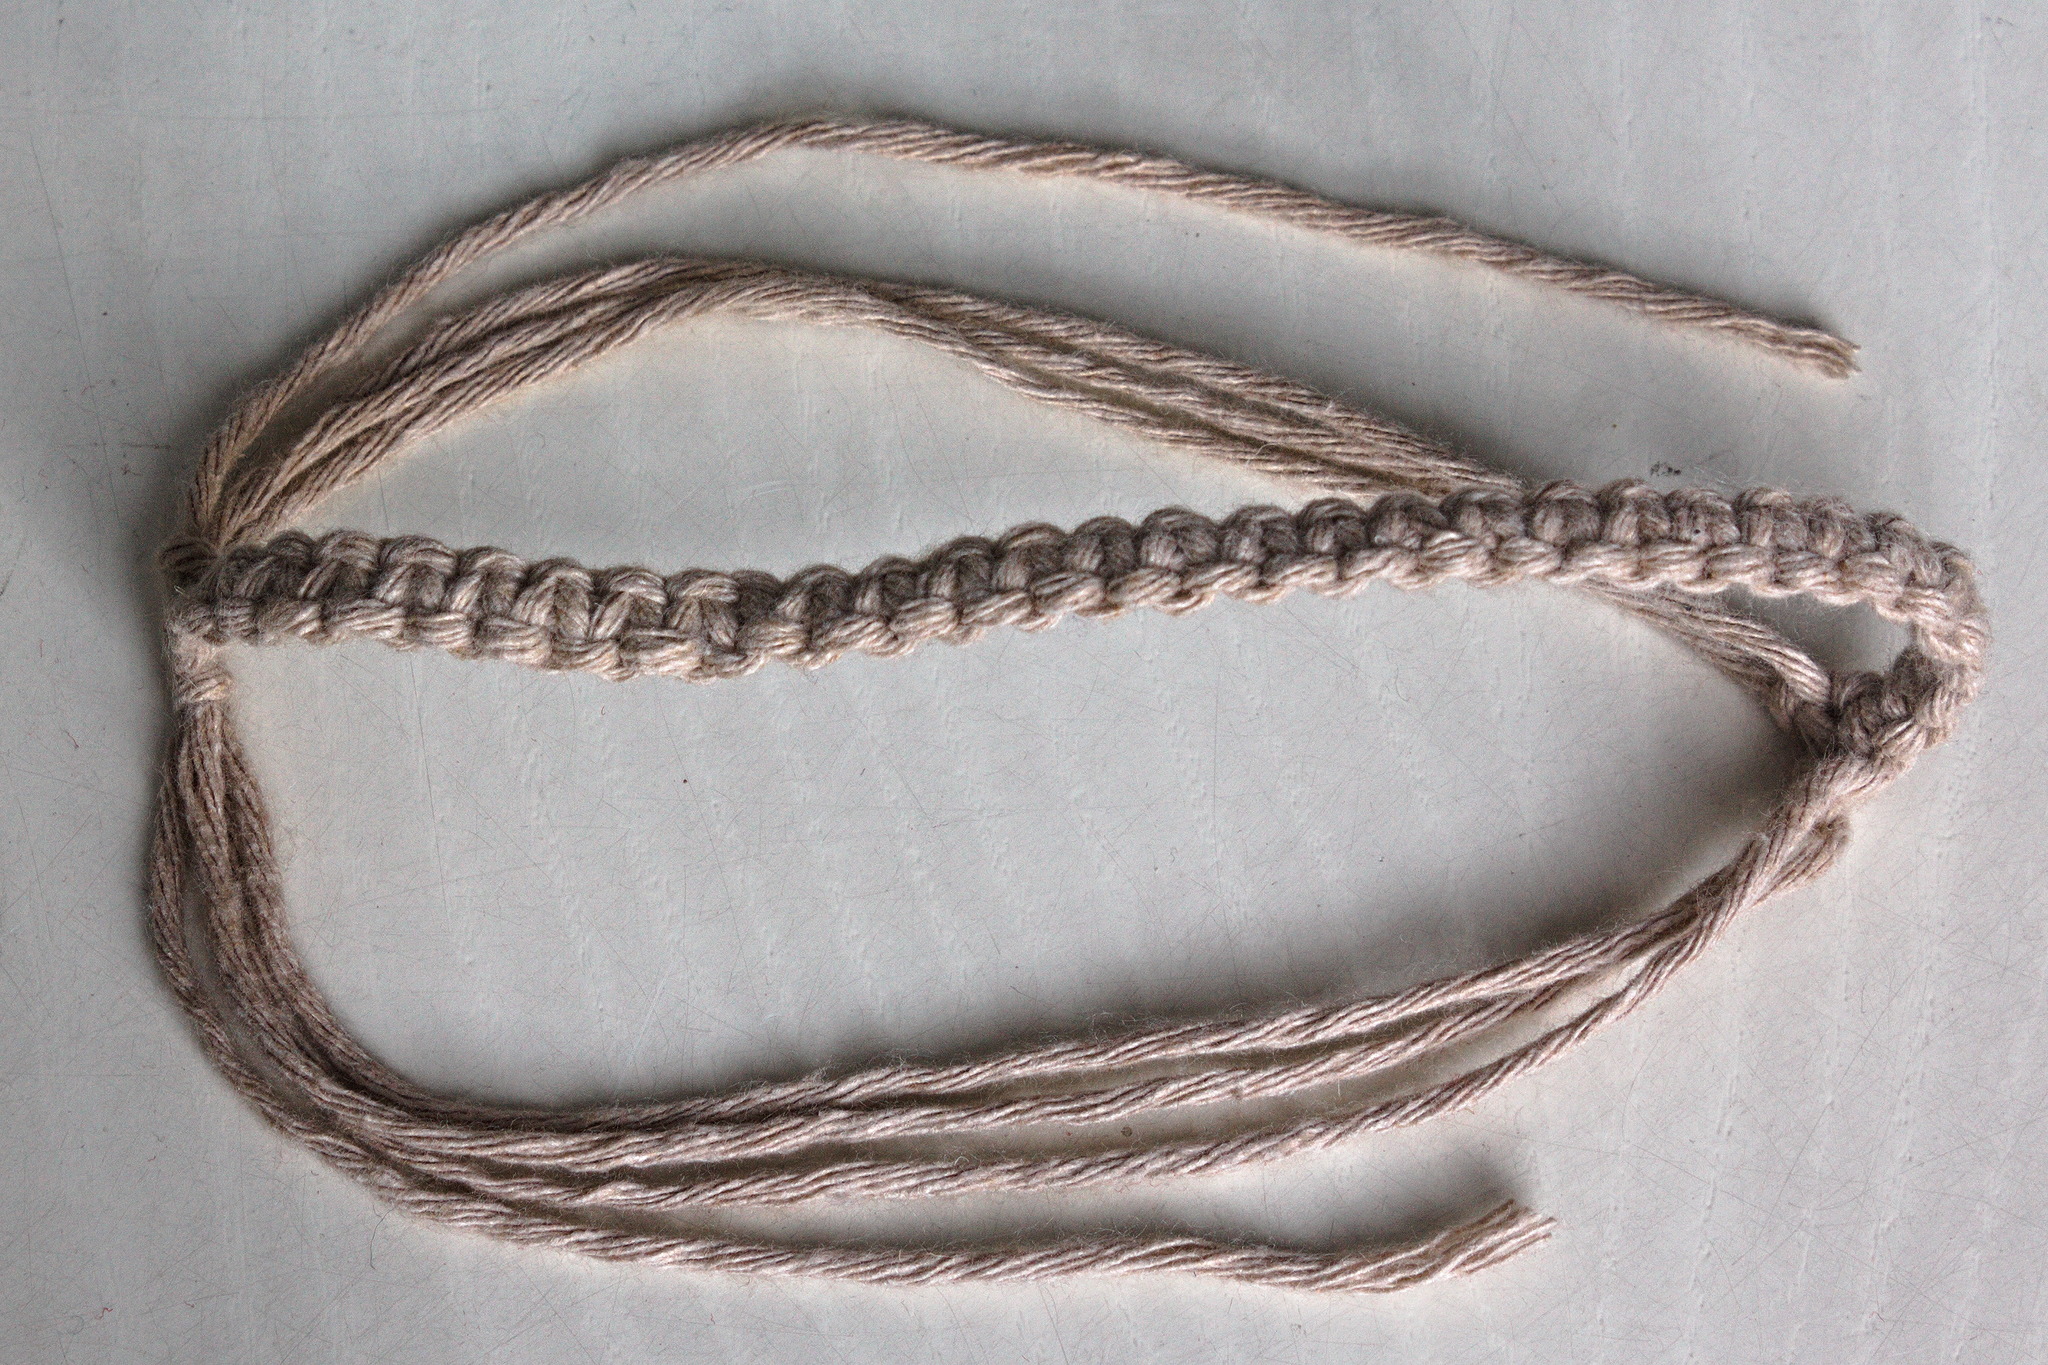 A loop of four cords, with a handle made of square knots that
keeps it together.